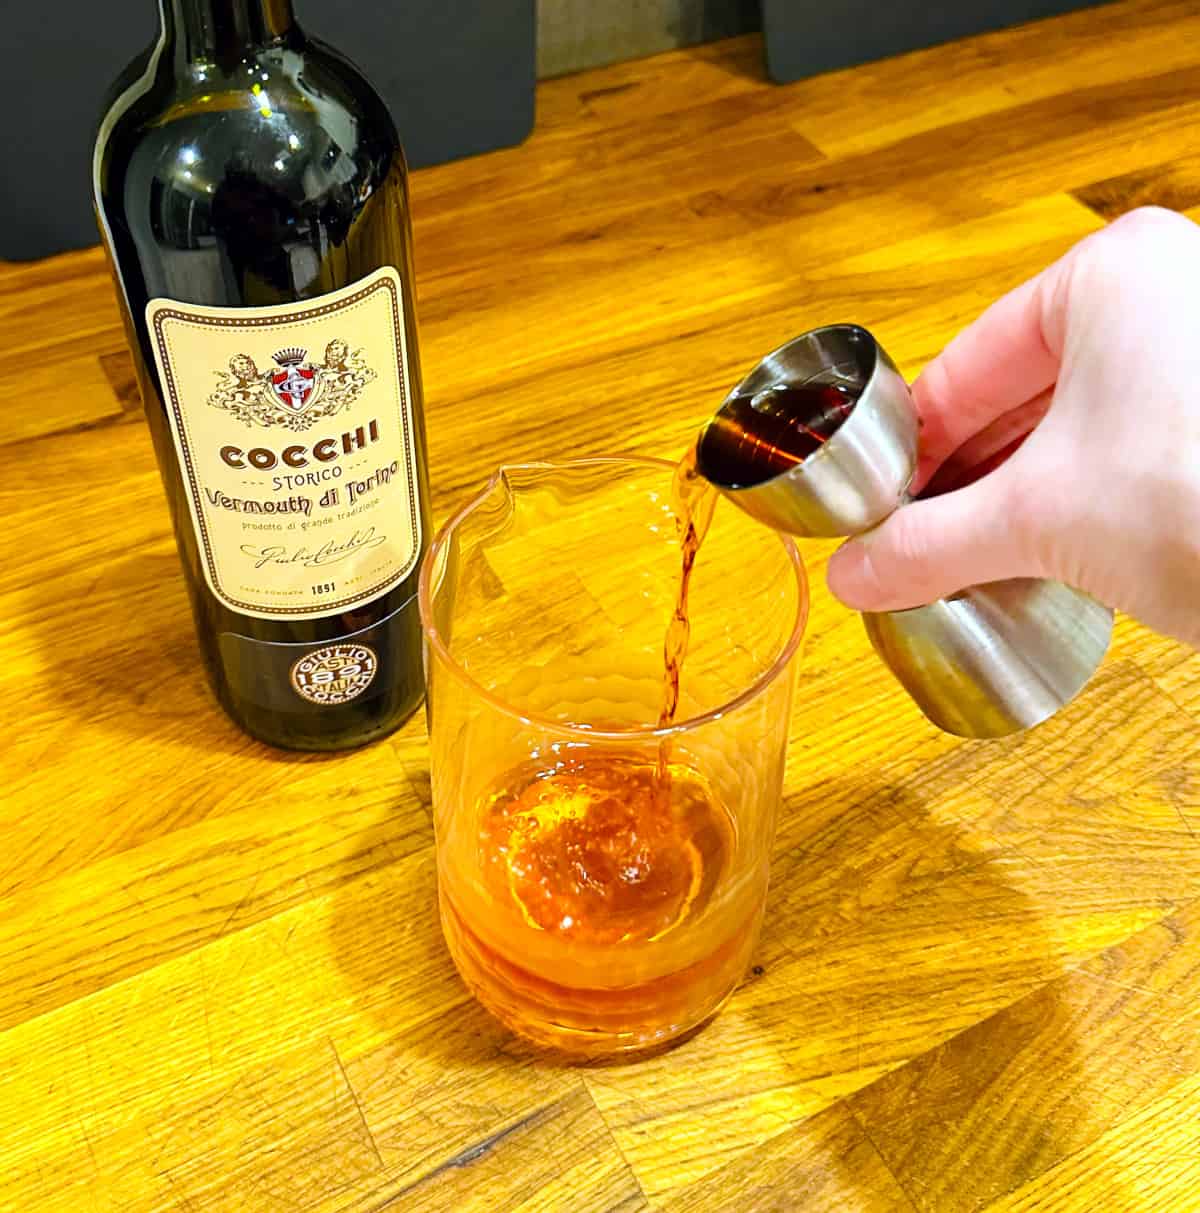 Pale brown liquid being poured from a steel measuring jigger into a mixing glass next to a bottle of Cocchi Vermouth di Torino.